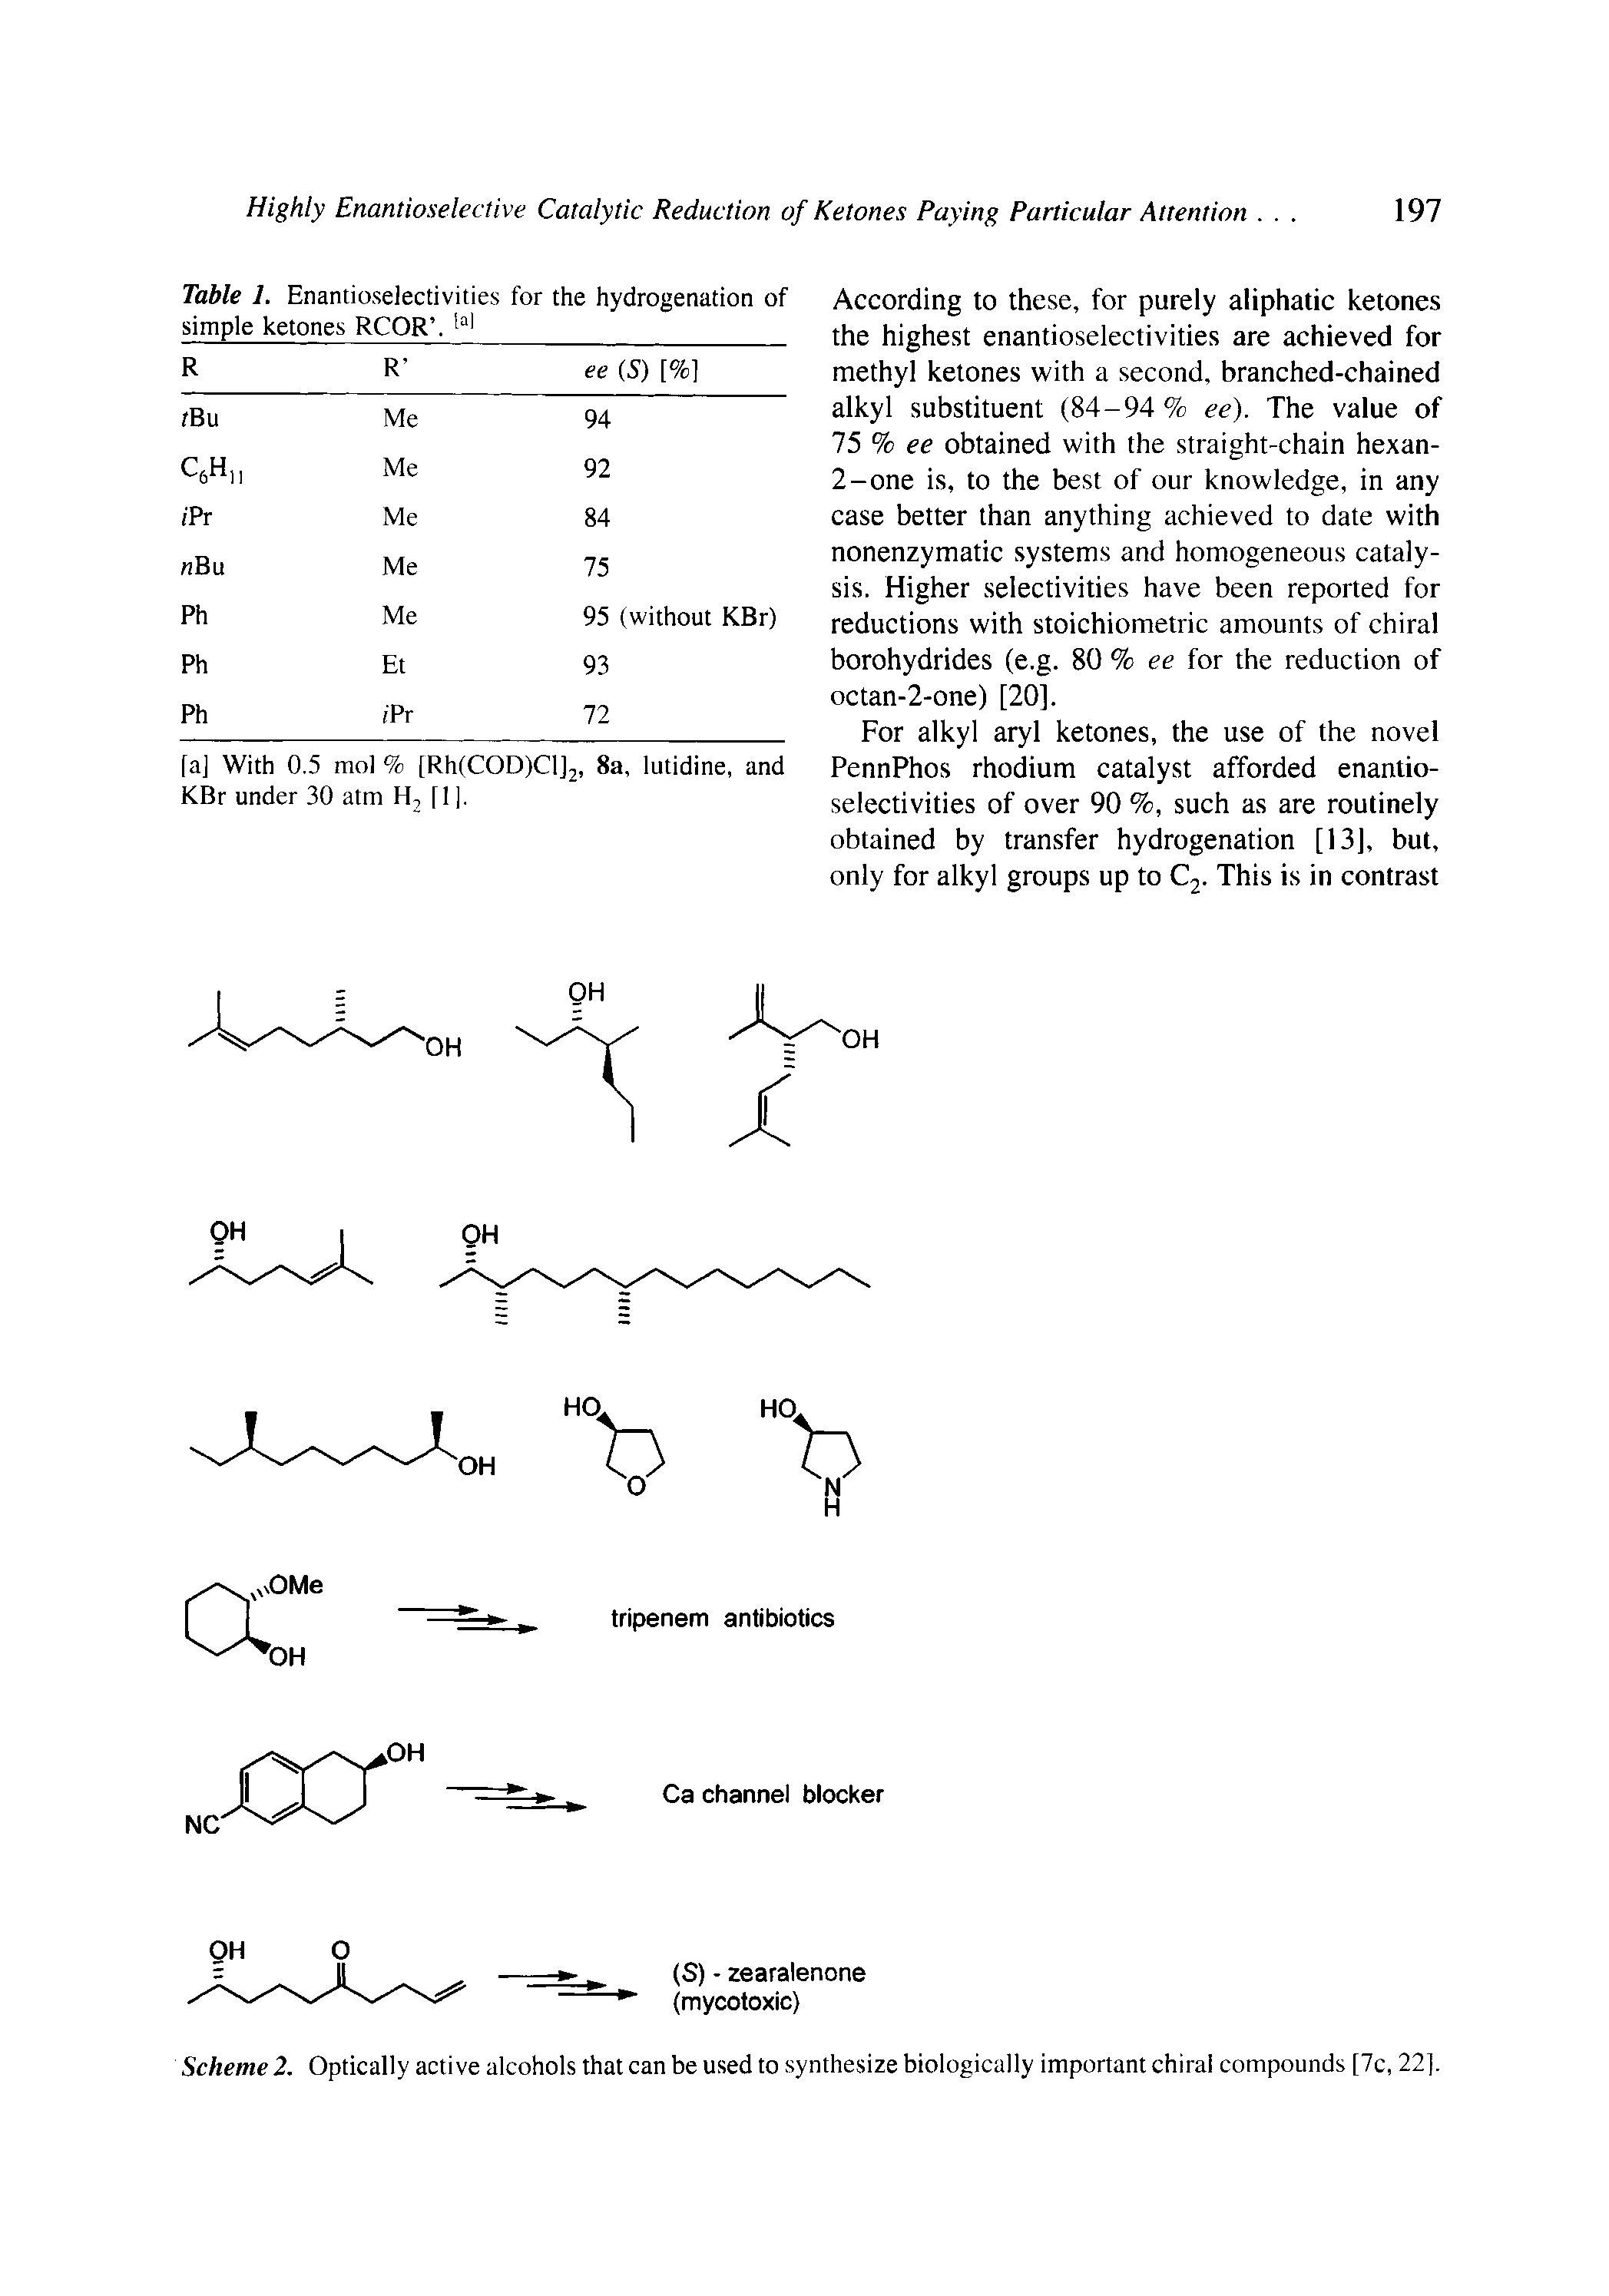 Scheme 2. Optically active alcohols that can be used to synthesize biologically important chiral compounds [7c, 22].